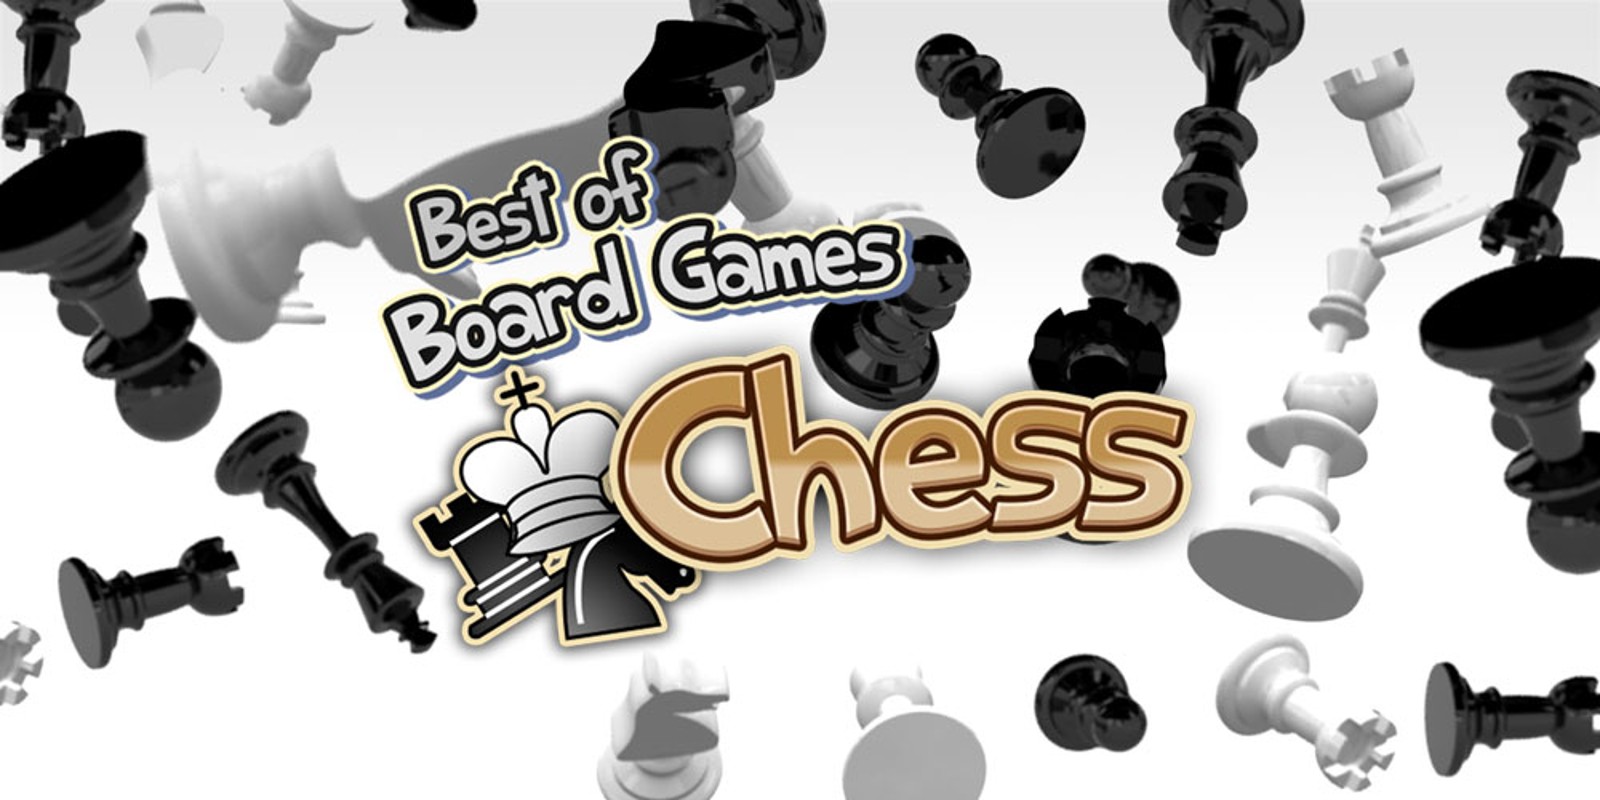 Best of Board Games – Chess